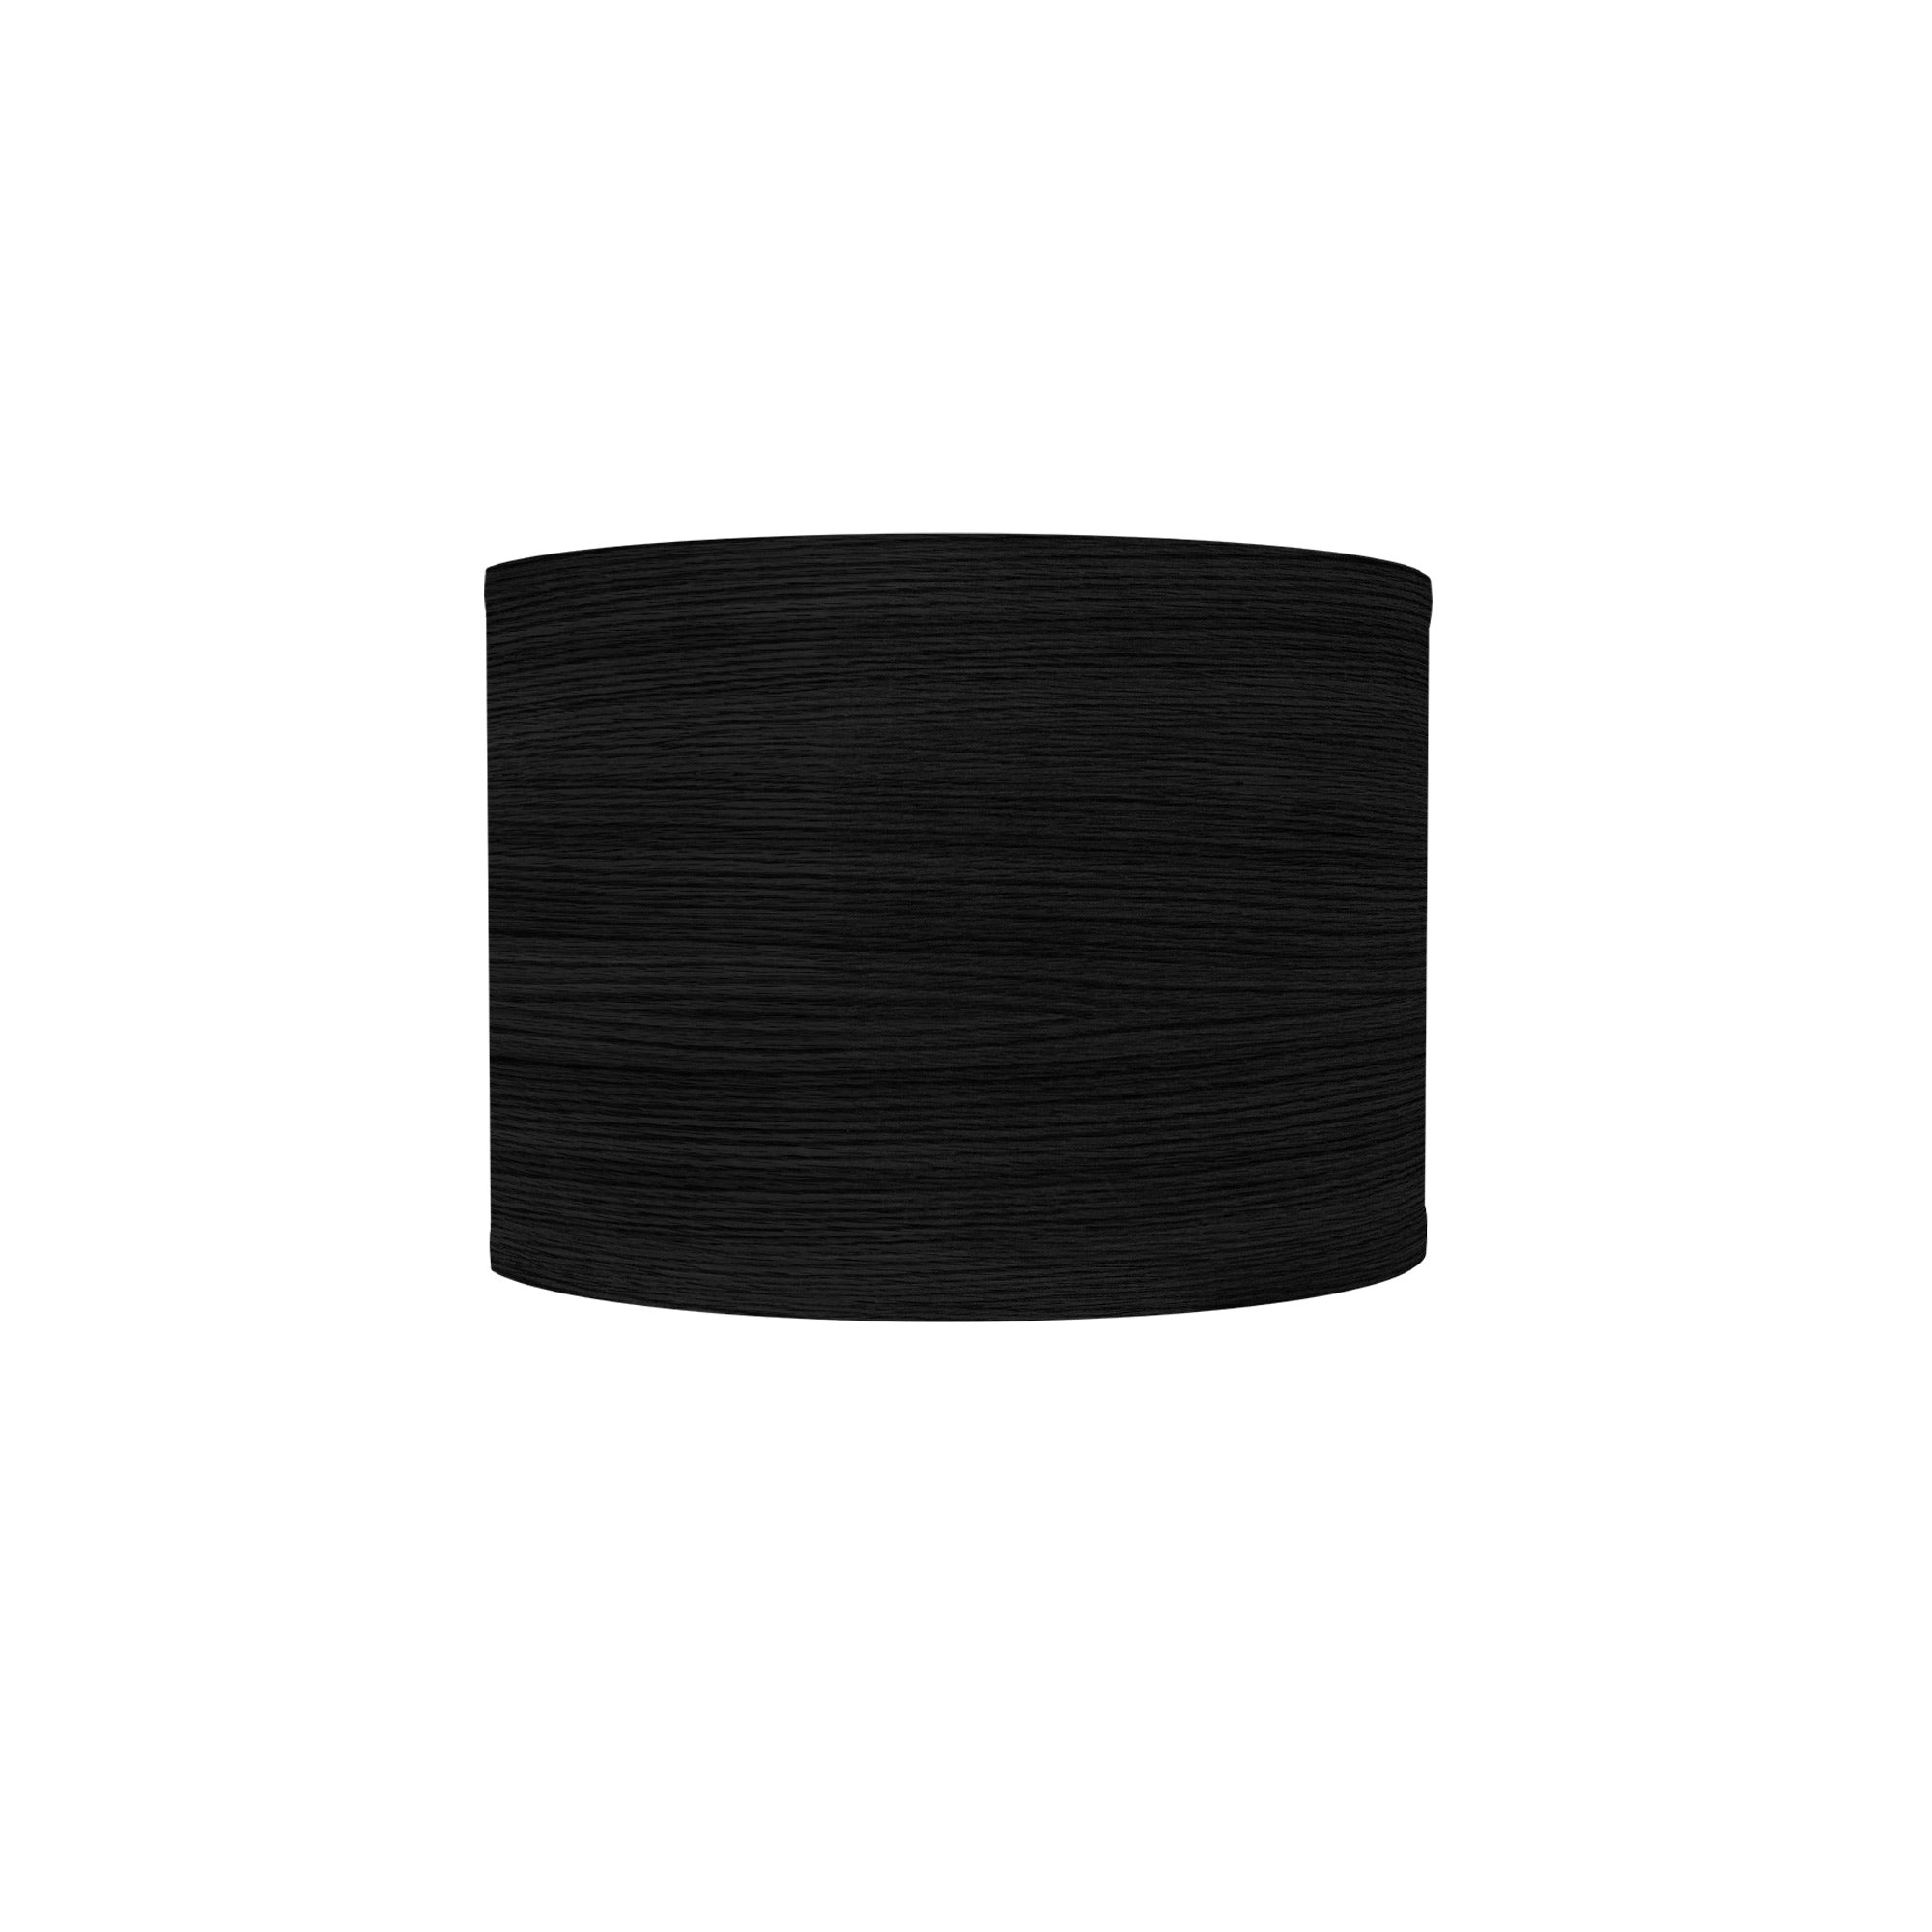 The Bryce Wall Sconce from Seascape Fixtures with a photo veneer shade in ebony color.